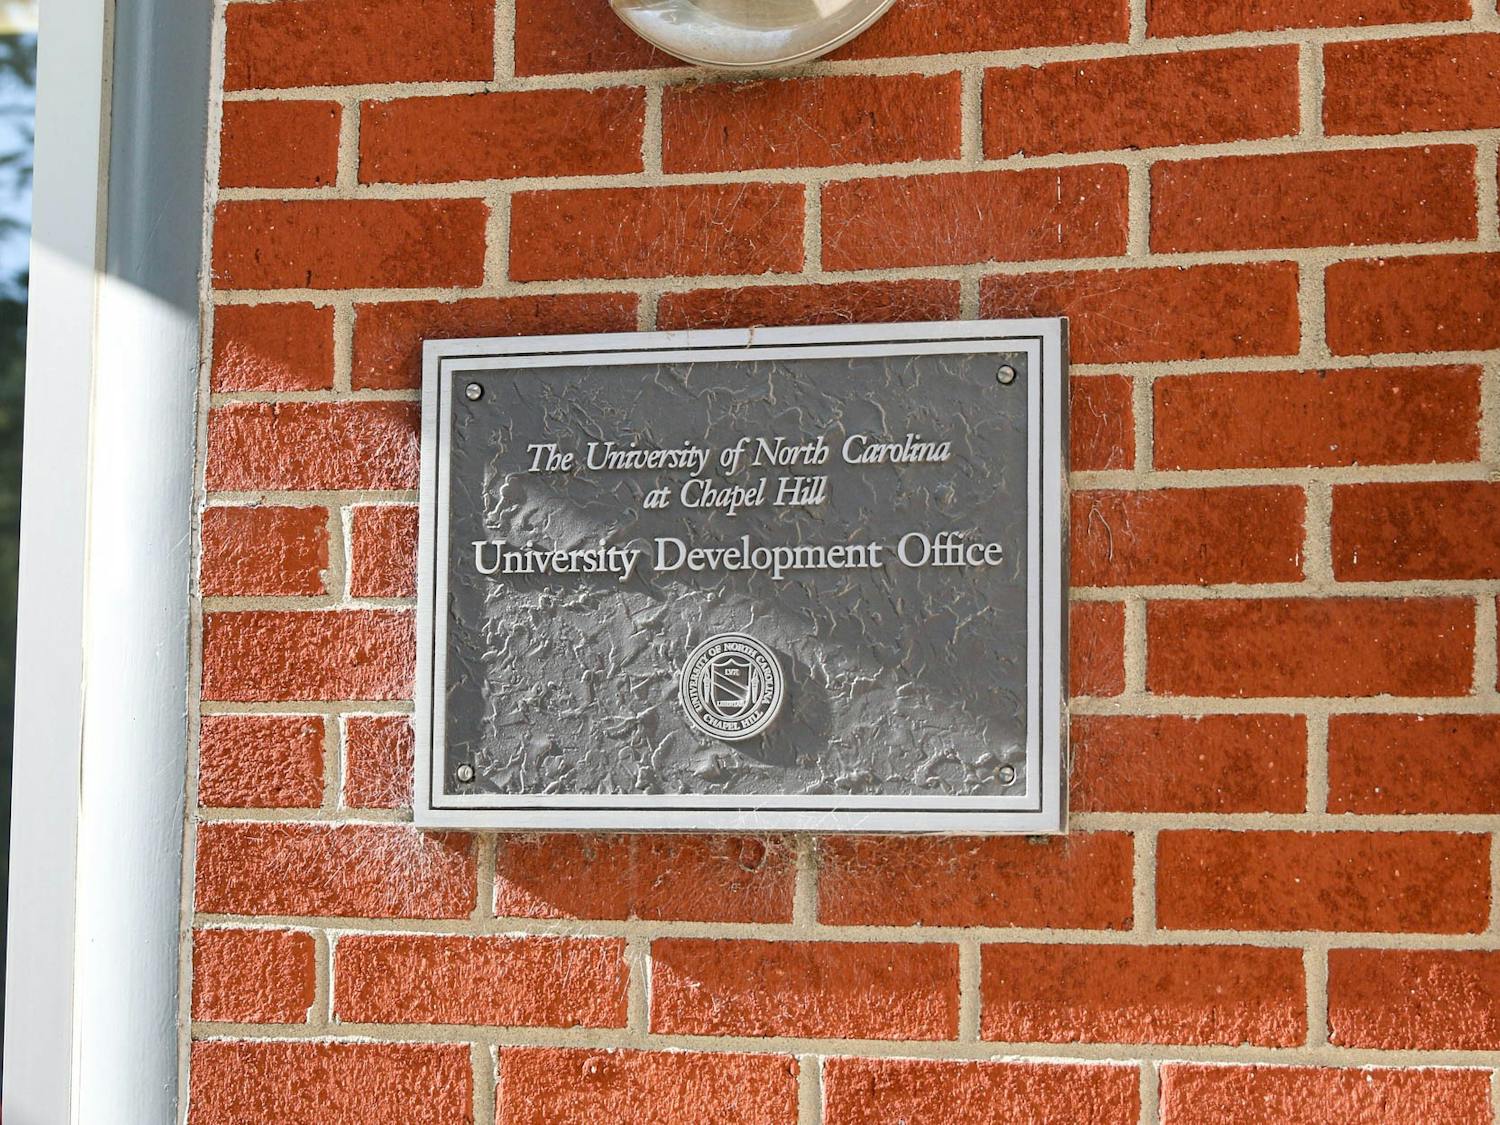 The sign for the University Development Office, provider of university endowments, as pictured on Tuesday, Oct. 6, 2020.